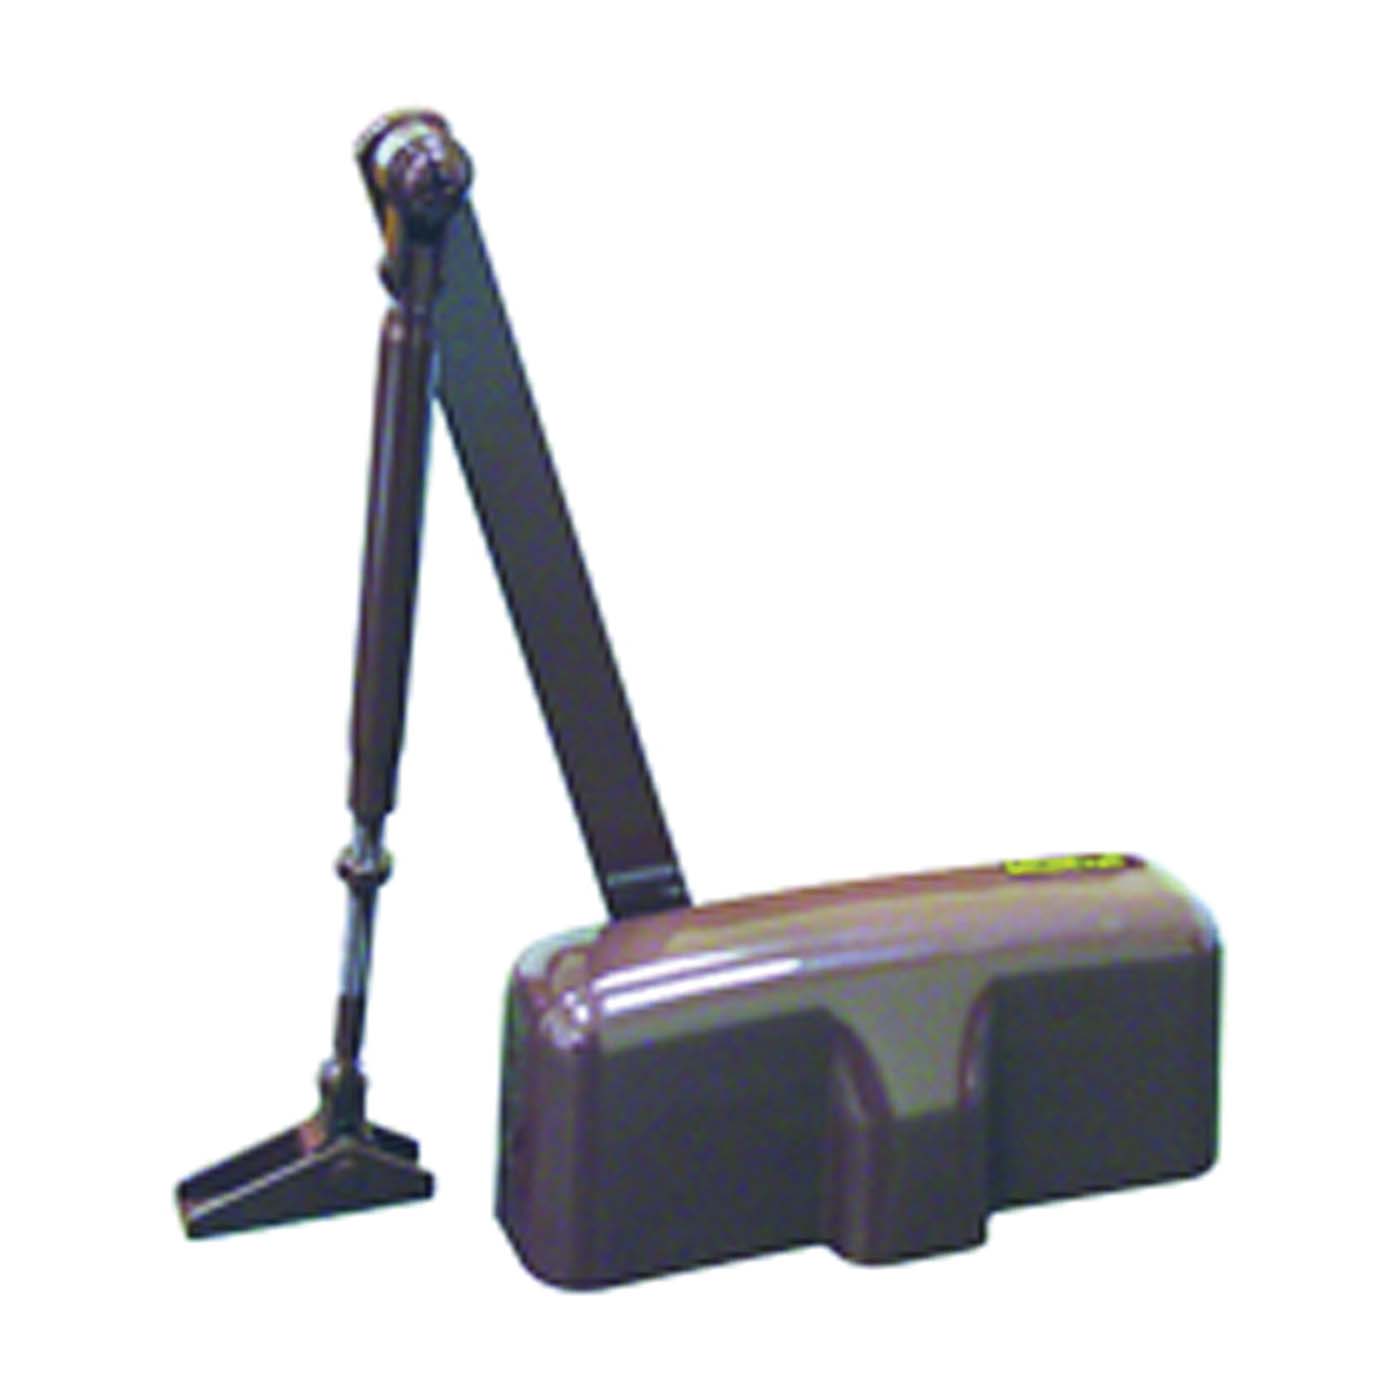 C103-BH-SA-BR Door Closer, Automatic, Aluminum, Brown, 140 lb, 150 x 19 mm Mounting Hole Distance